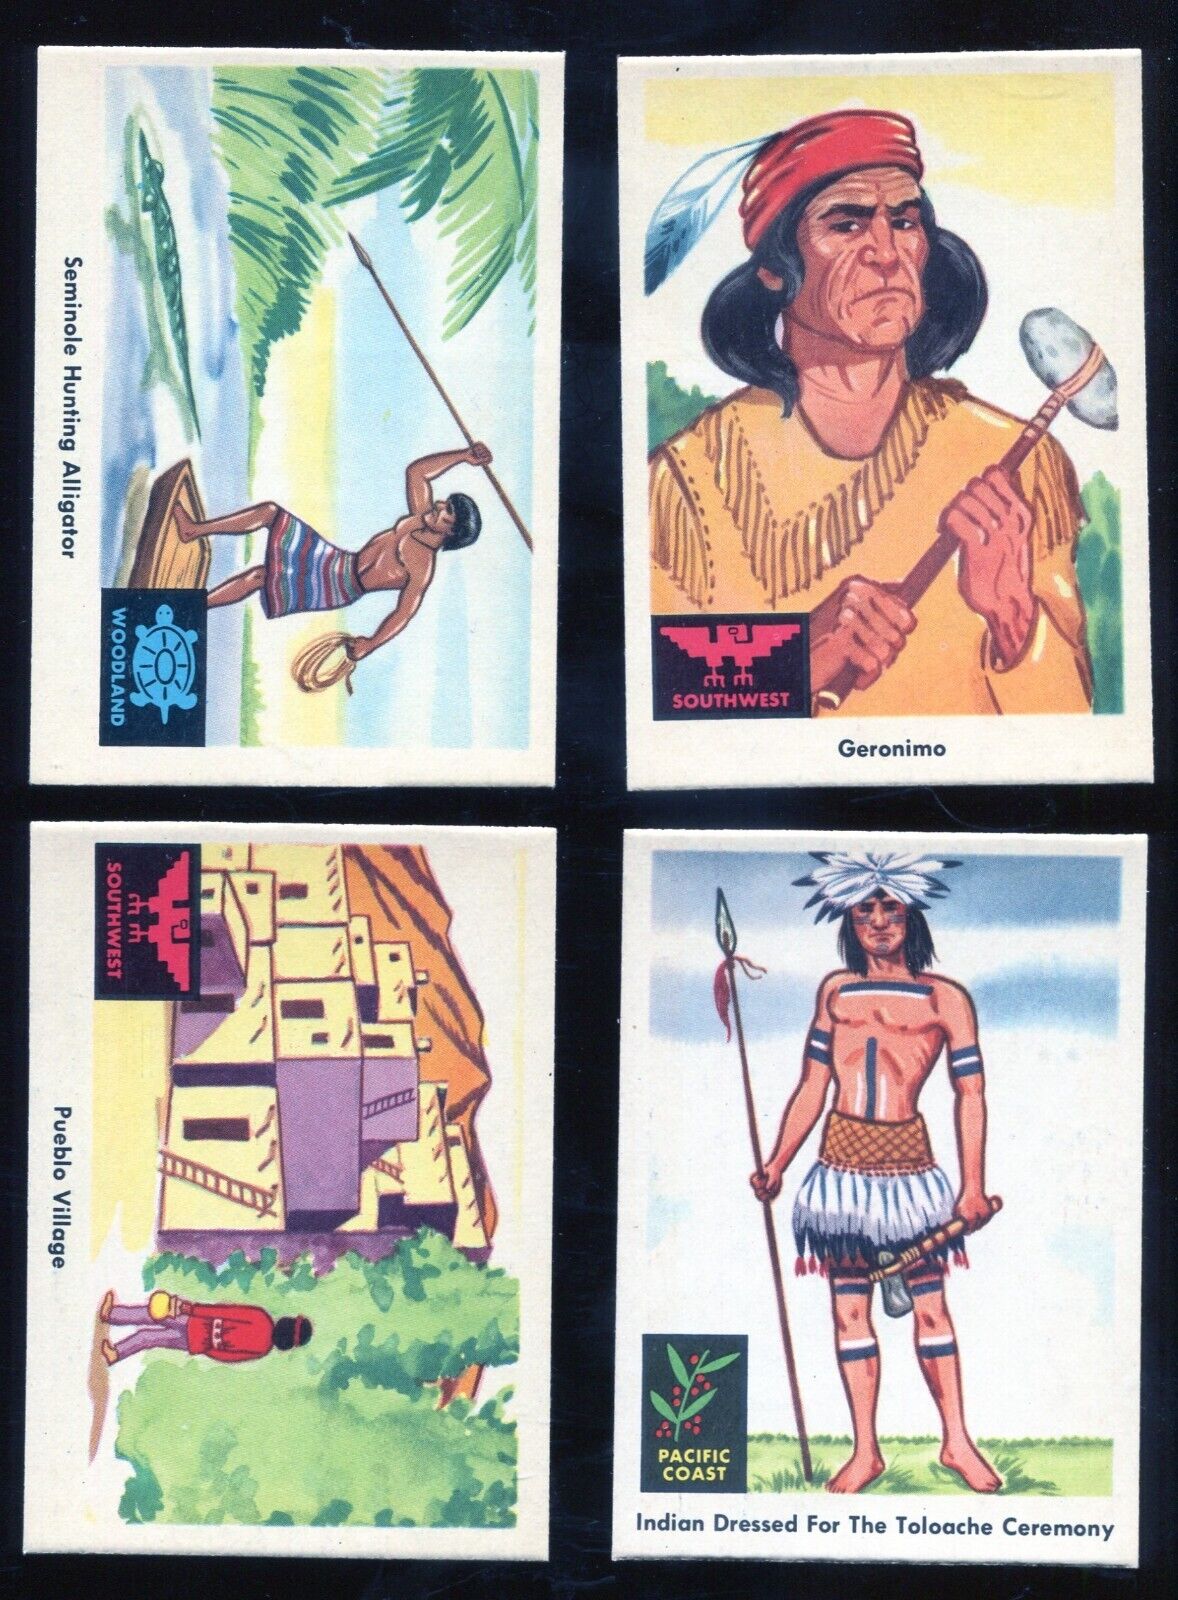 Lot of 4) 1959 Fleer Indian trading cards. 